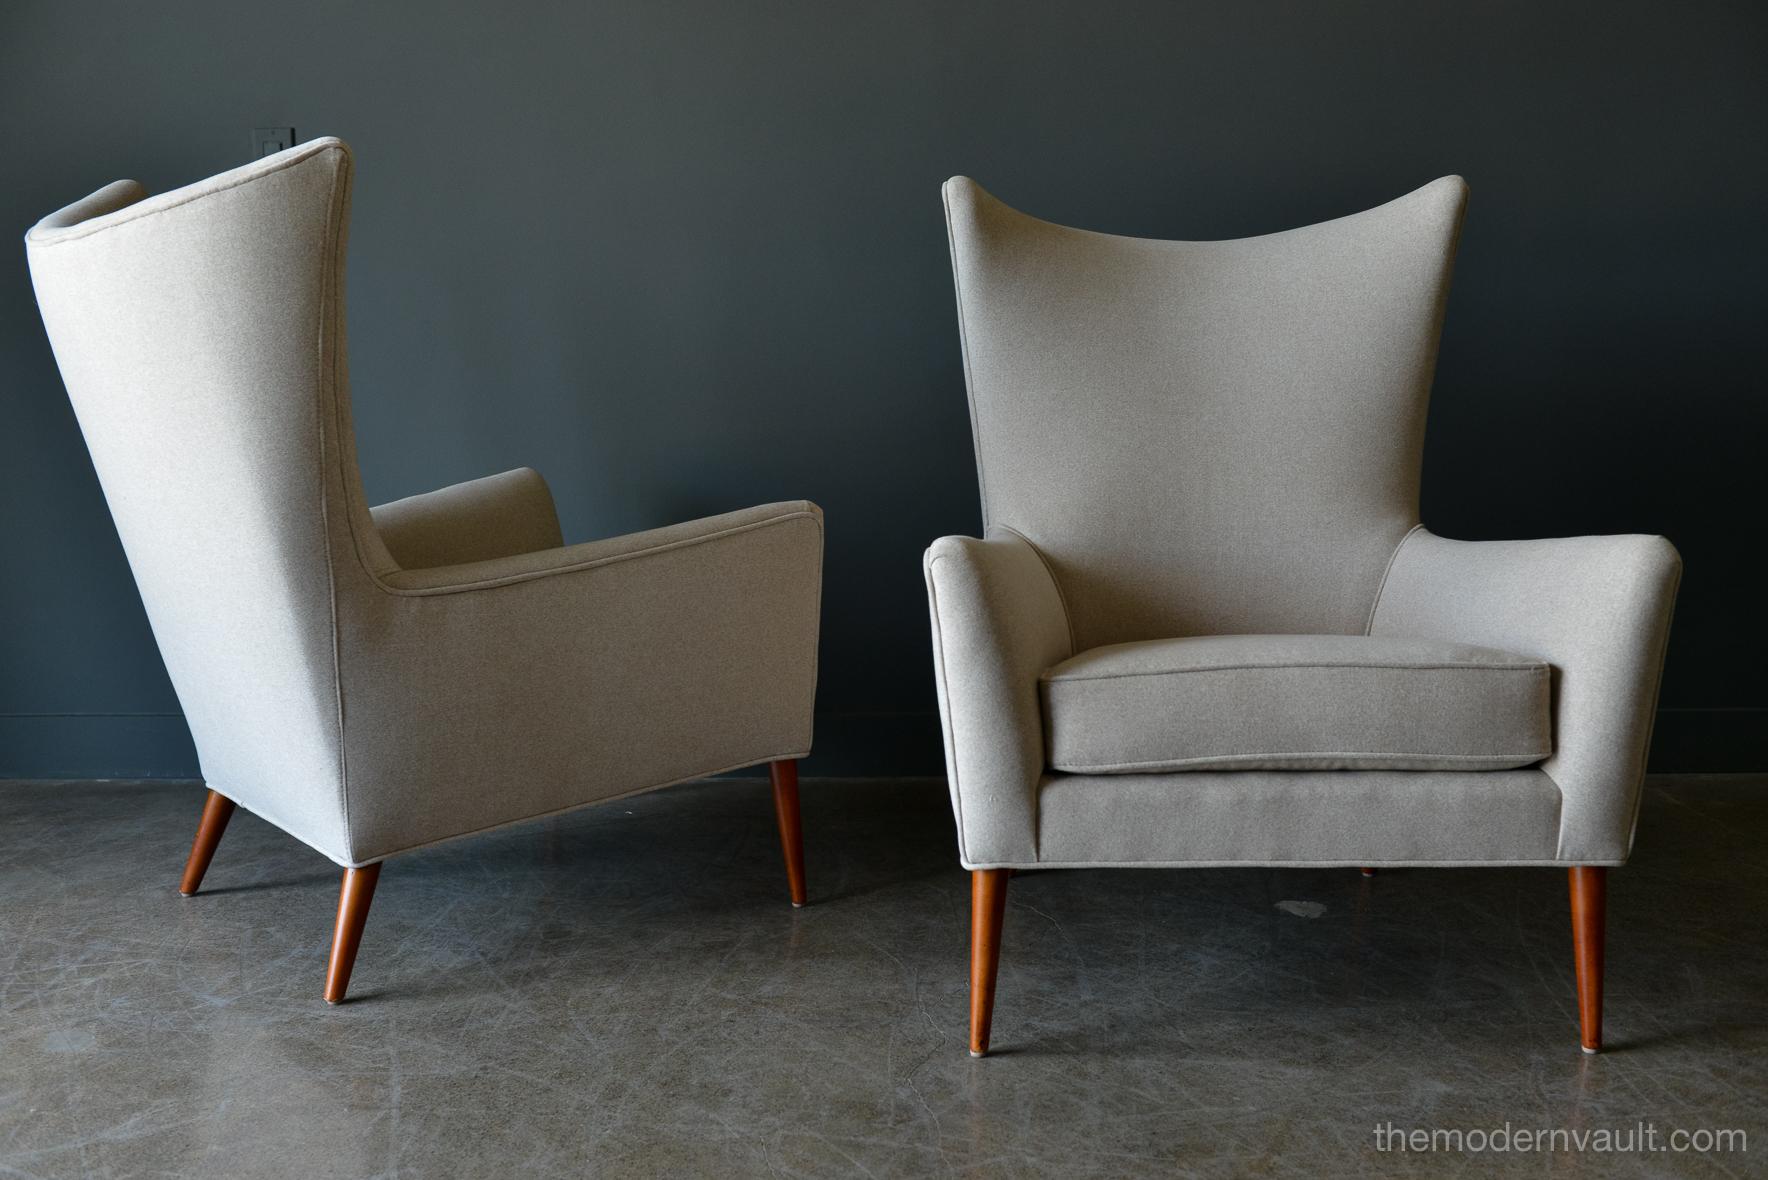 Pair of Paul McCobb Model 3015 wingback lounge chairs, circa 1955. Rare matching pair professionally restored in a rich, high quality oatmeal/light tan felt poly. Fabric exceeds 60,000 double rubs using Wyzenbeek method. Gorgeous design, this chair